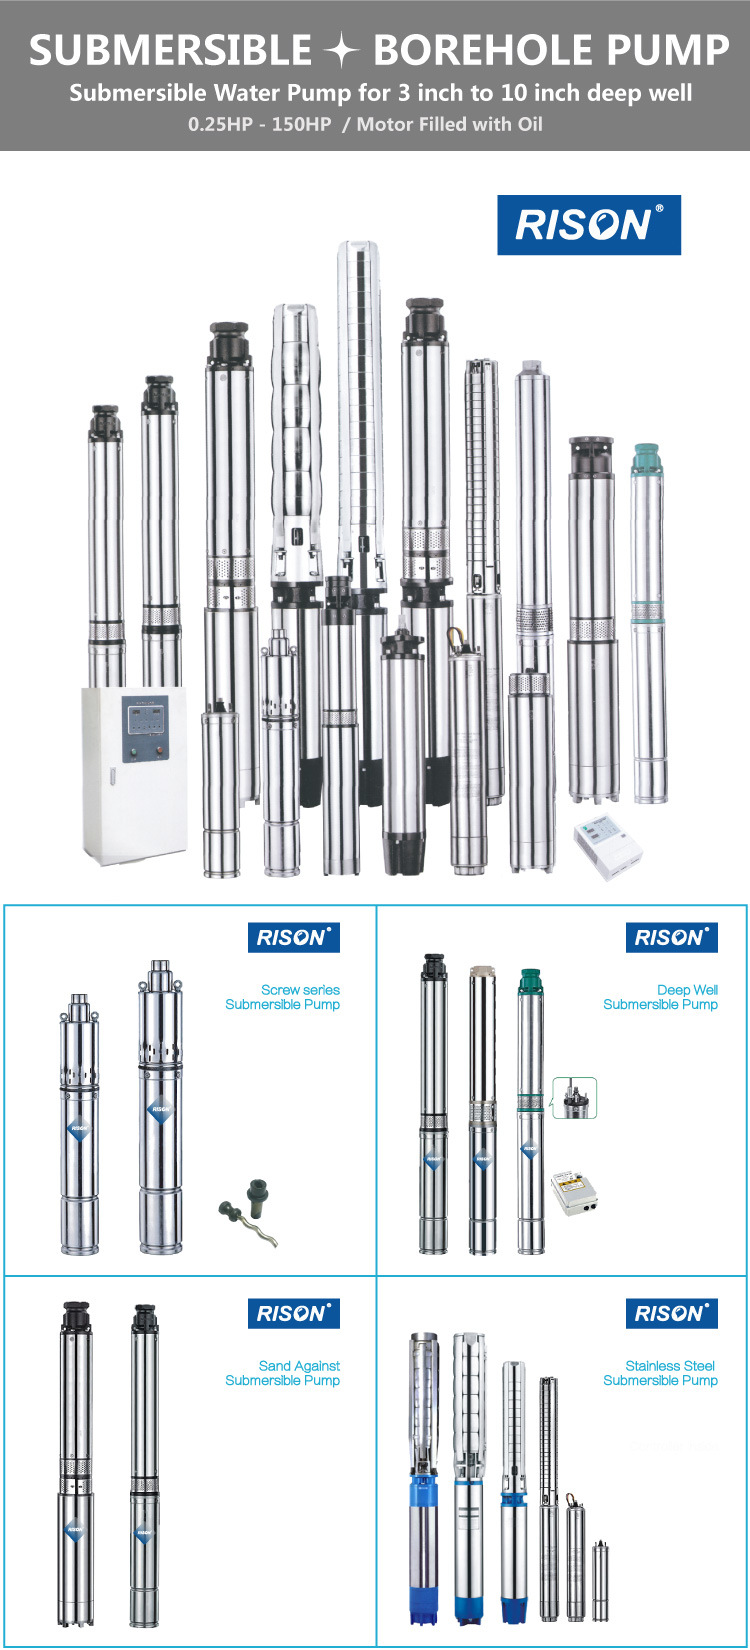 Best Price Electric Submersible Water Pump for 3 to 10 Inch Deep Well/Borehole, Irrigation